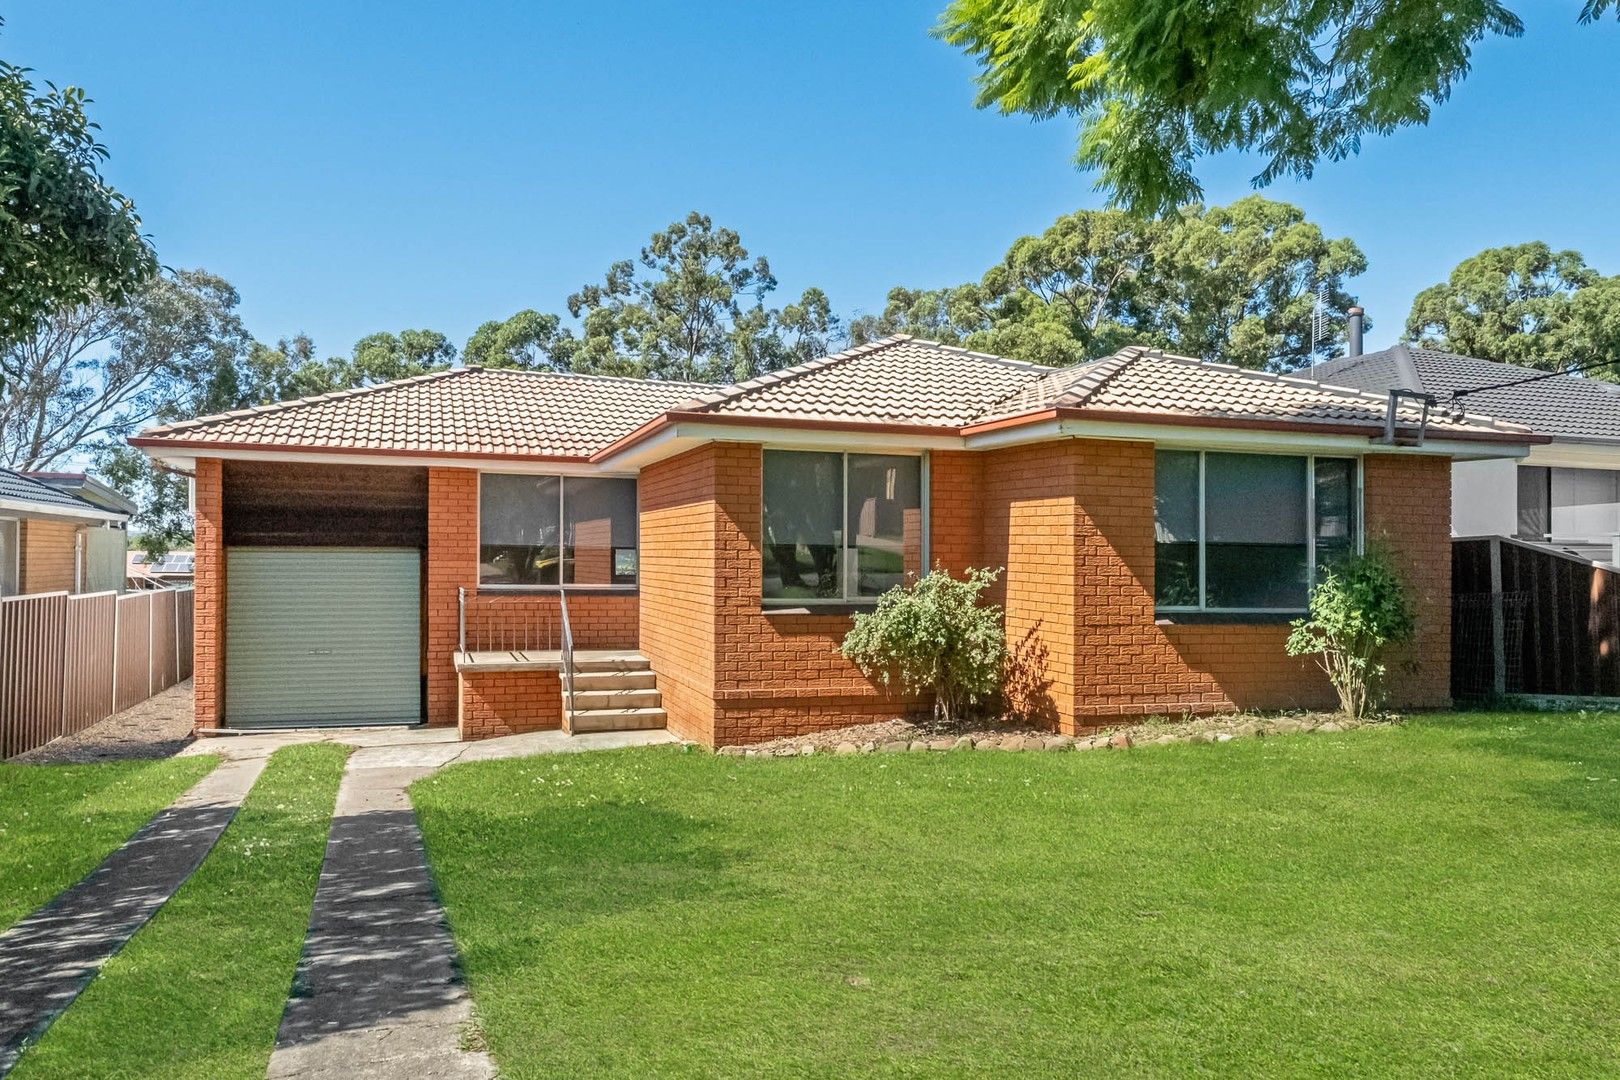 3 bedrooms House in 30 Berallier Drive CAMDEN SOUTH NSW, 2570